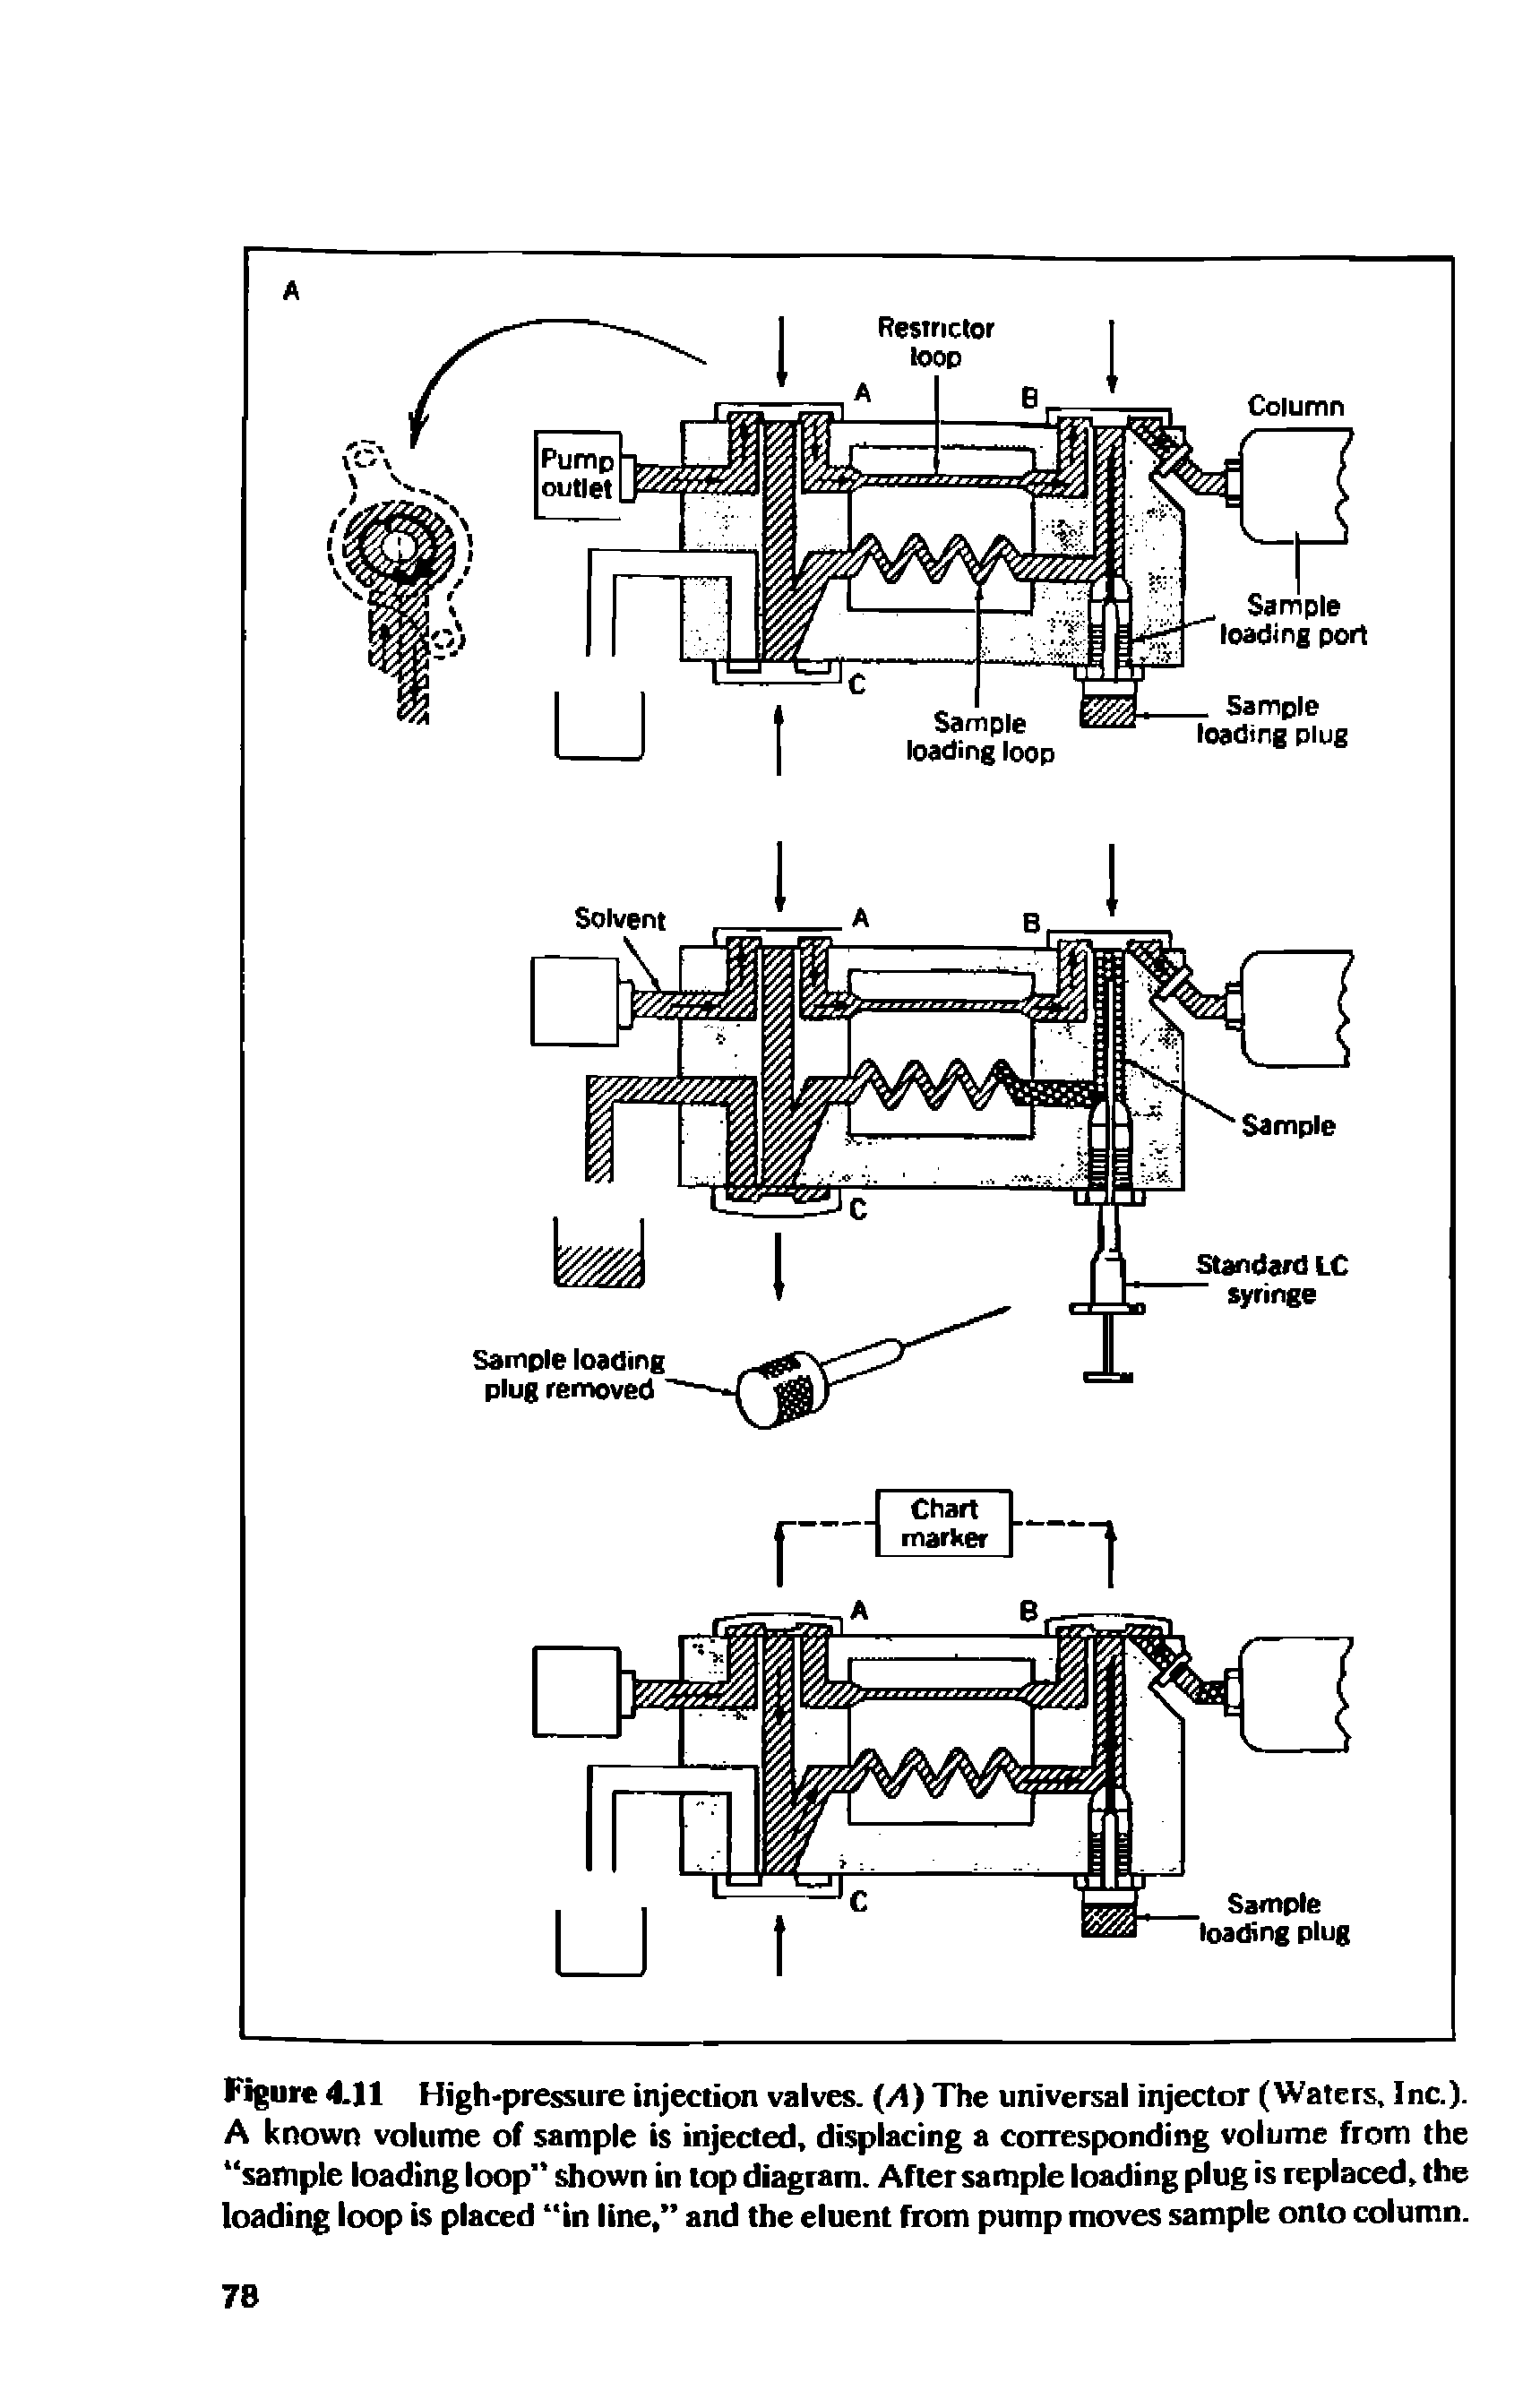 Figure 4.11 High-pressure injection valves. (A) The universal injector (Waters, Inc.). A known volume of sample is injected, displacing a corresponding volume from the sample loading loop shown in lop diagram. After sample loading plug is replaced, the loading loop is placed in line, and the eluent from pump moves sample onto column.